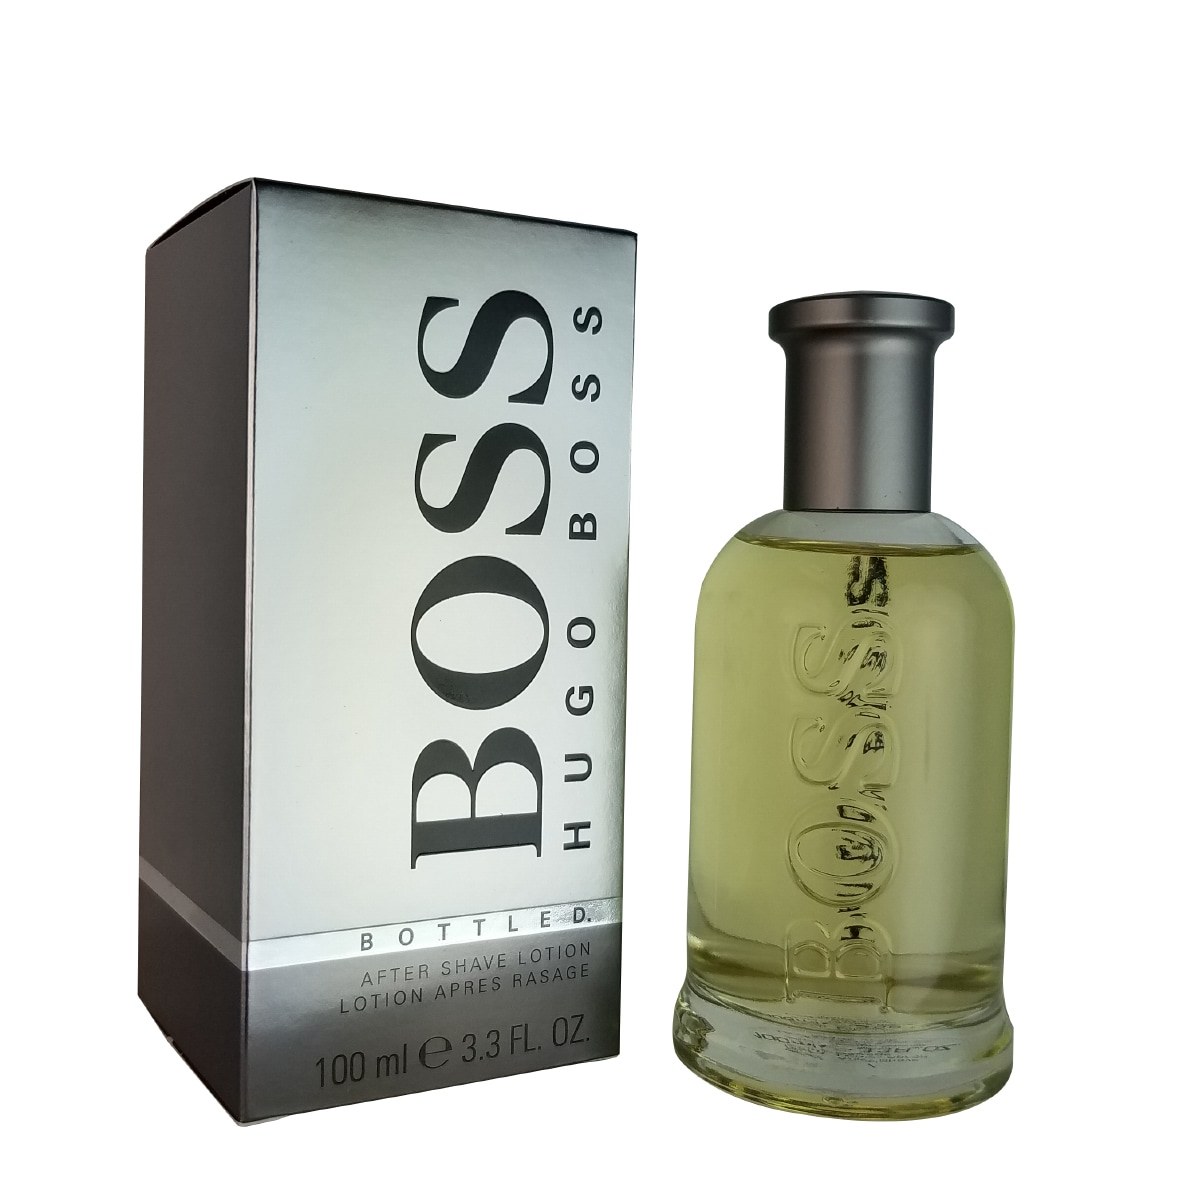 boss aftershave